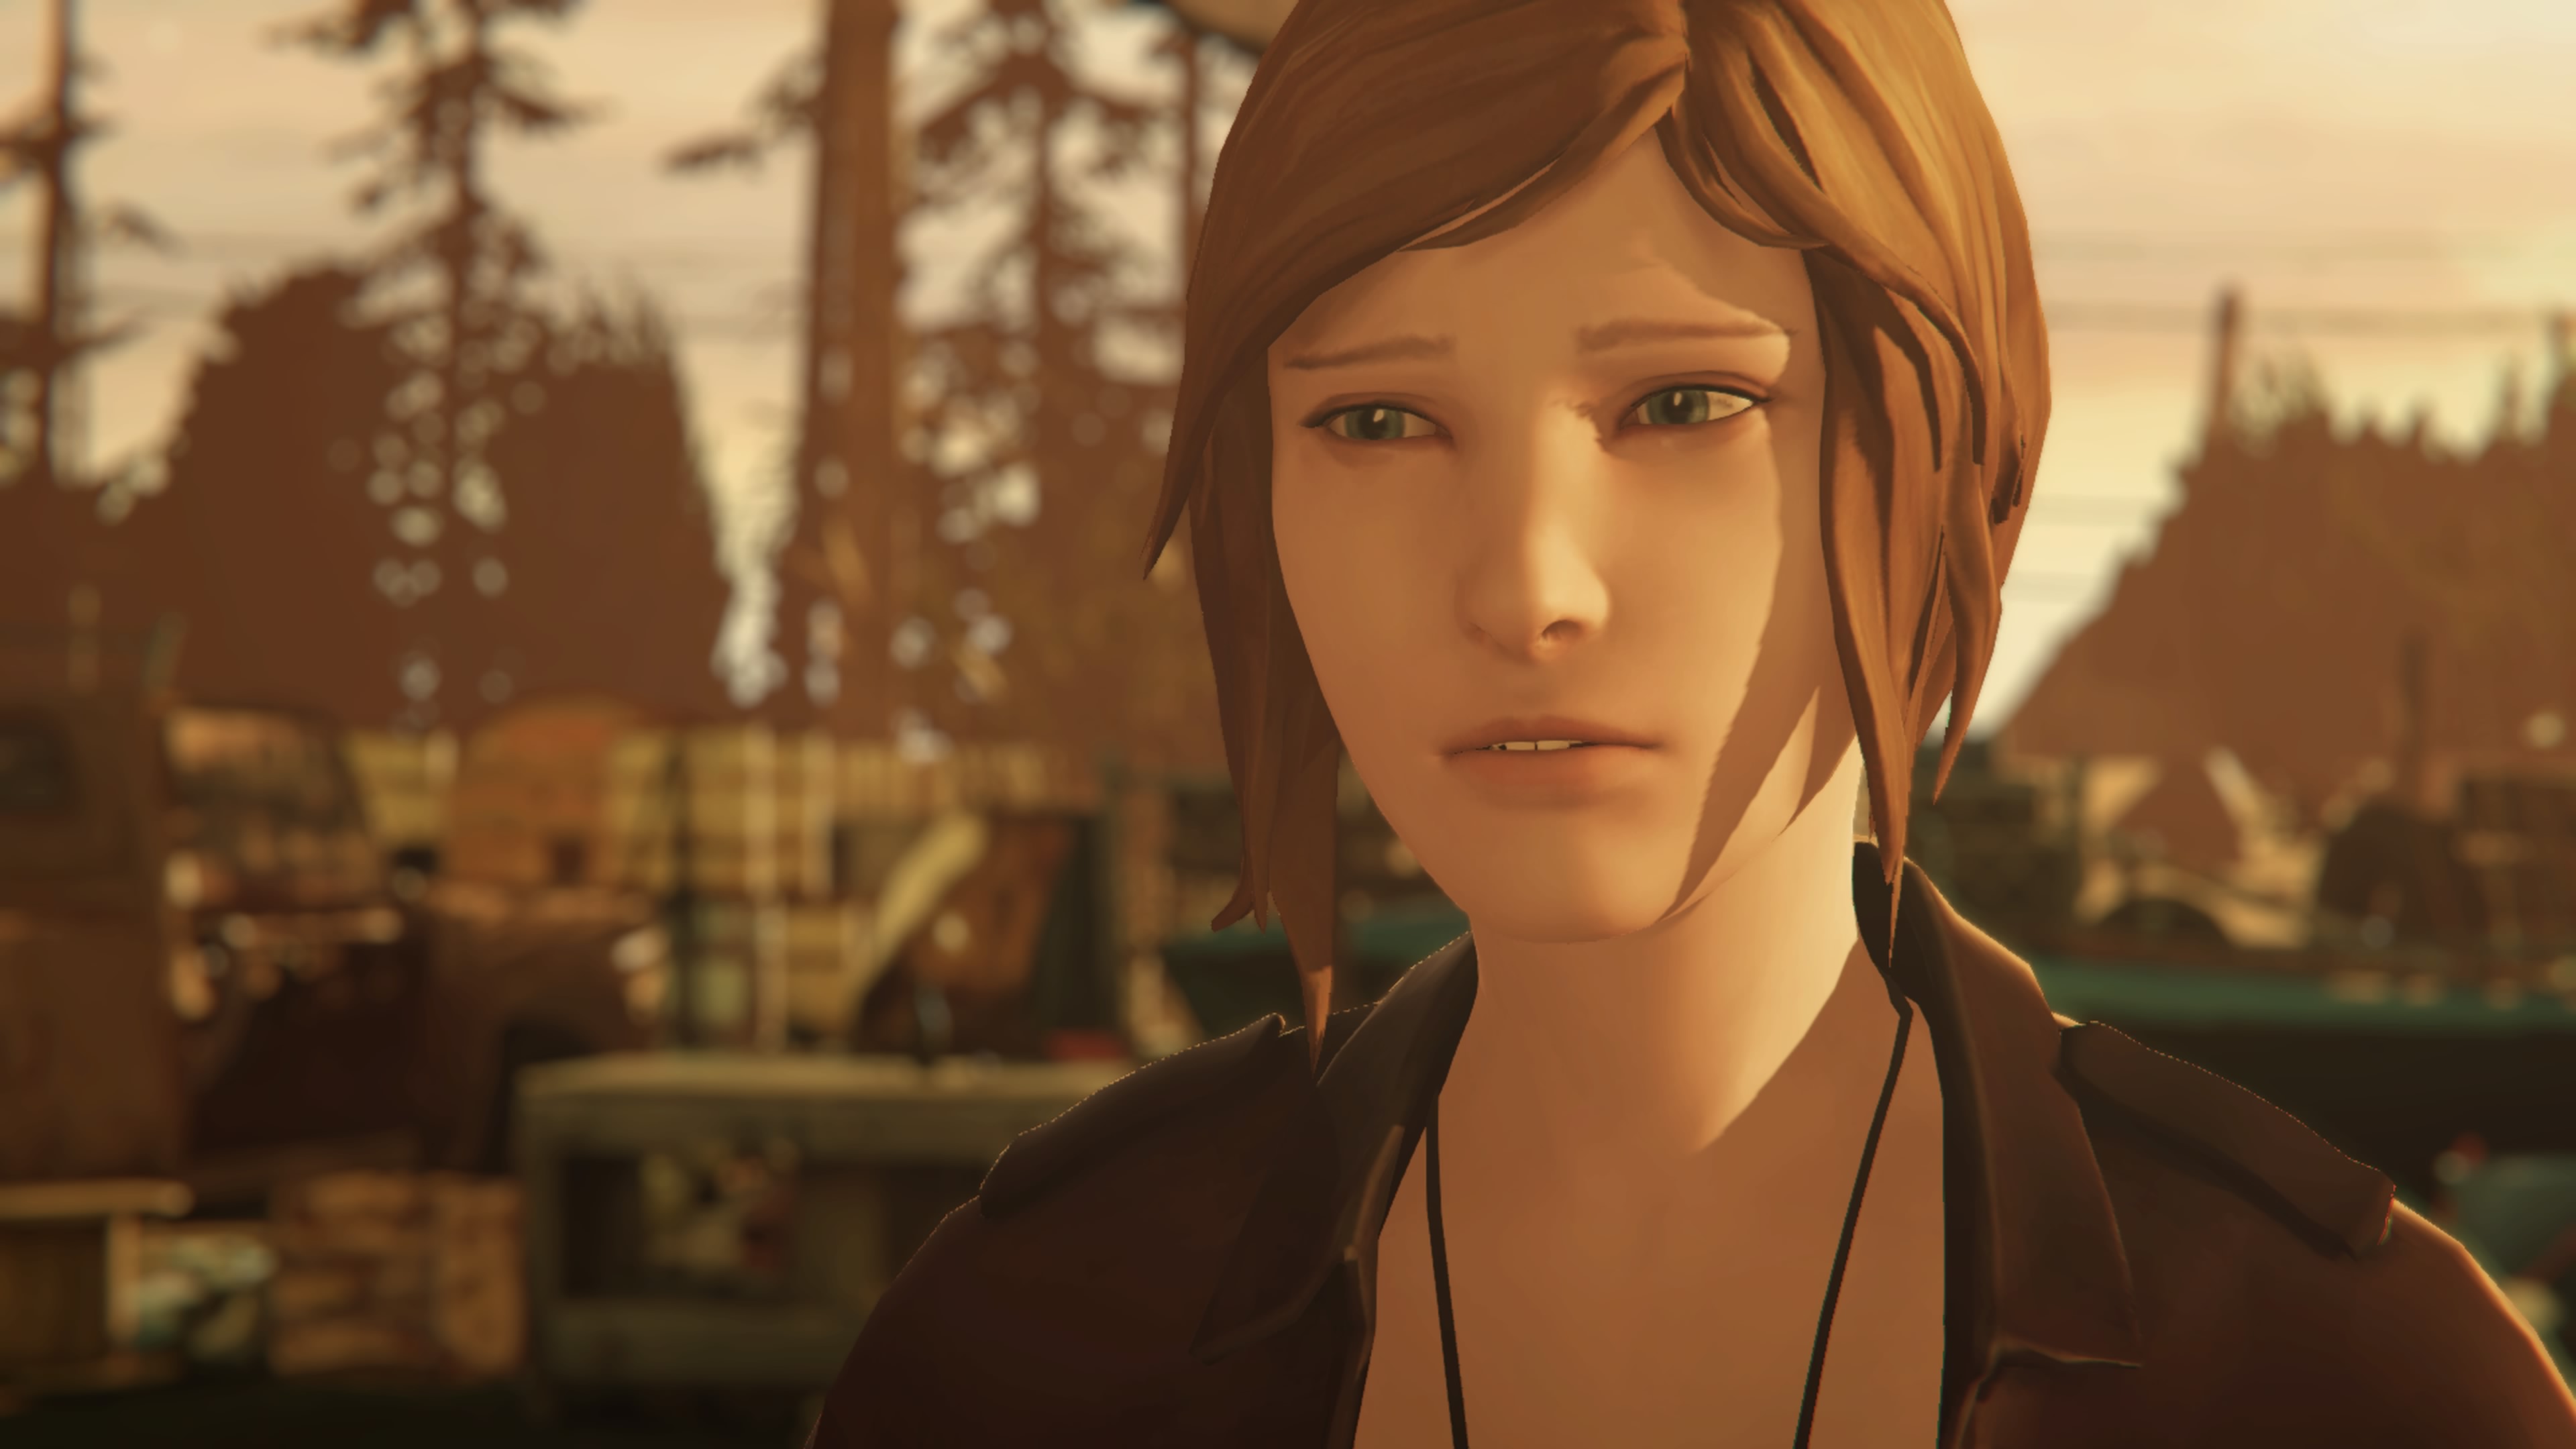 There are plenty of tension filled moments in this new chapter in the Life is Strange series.